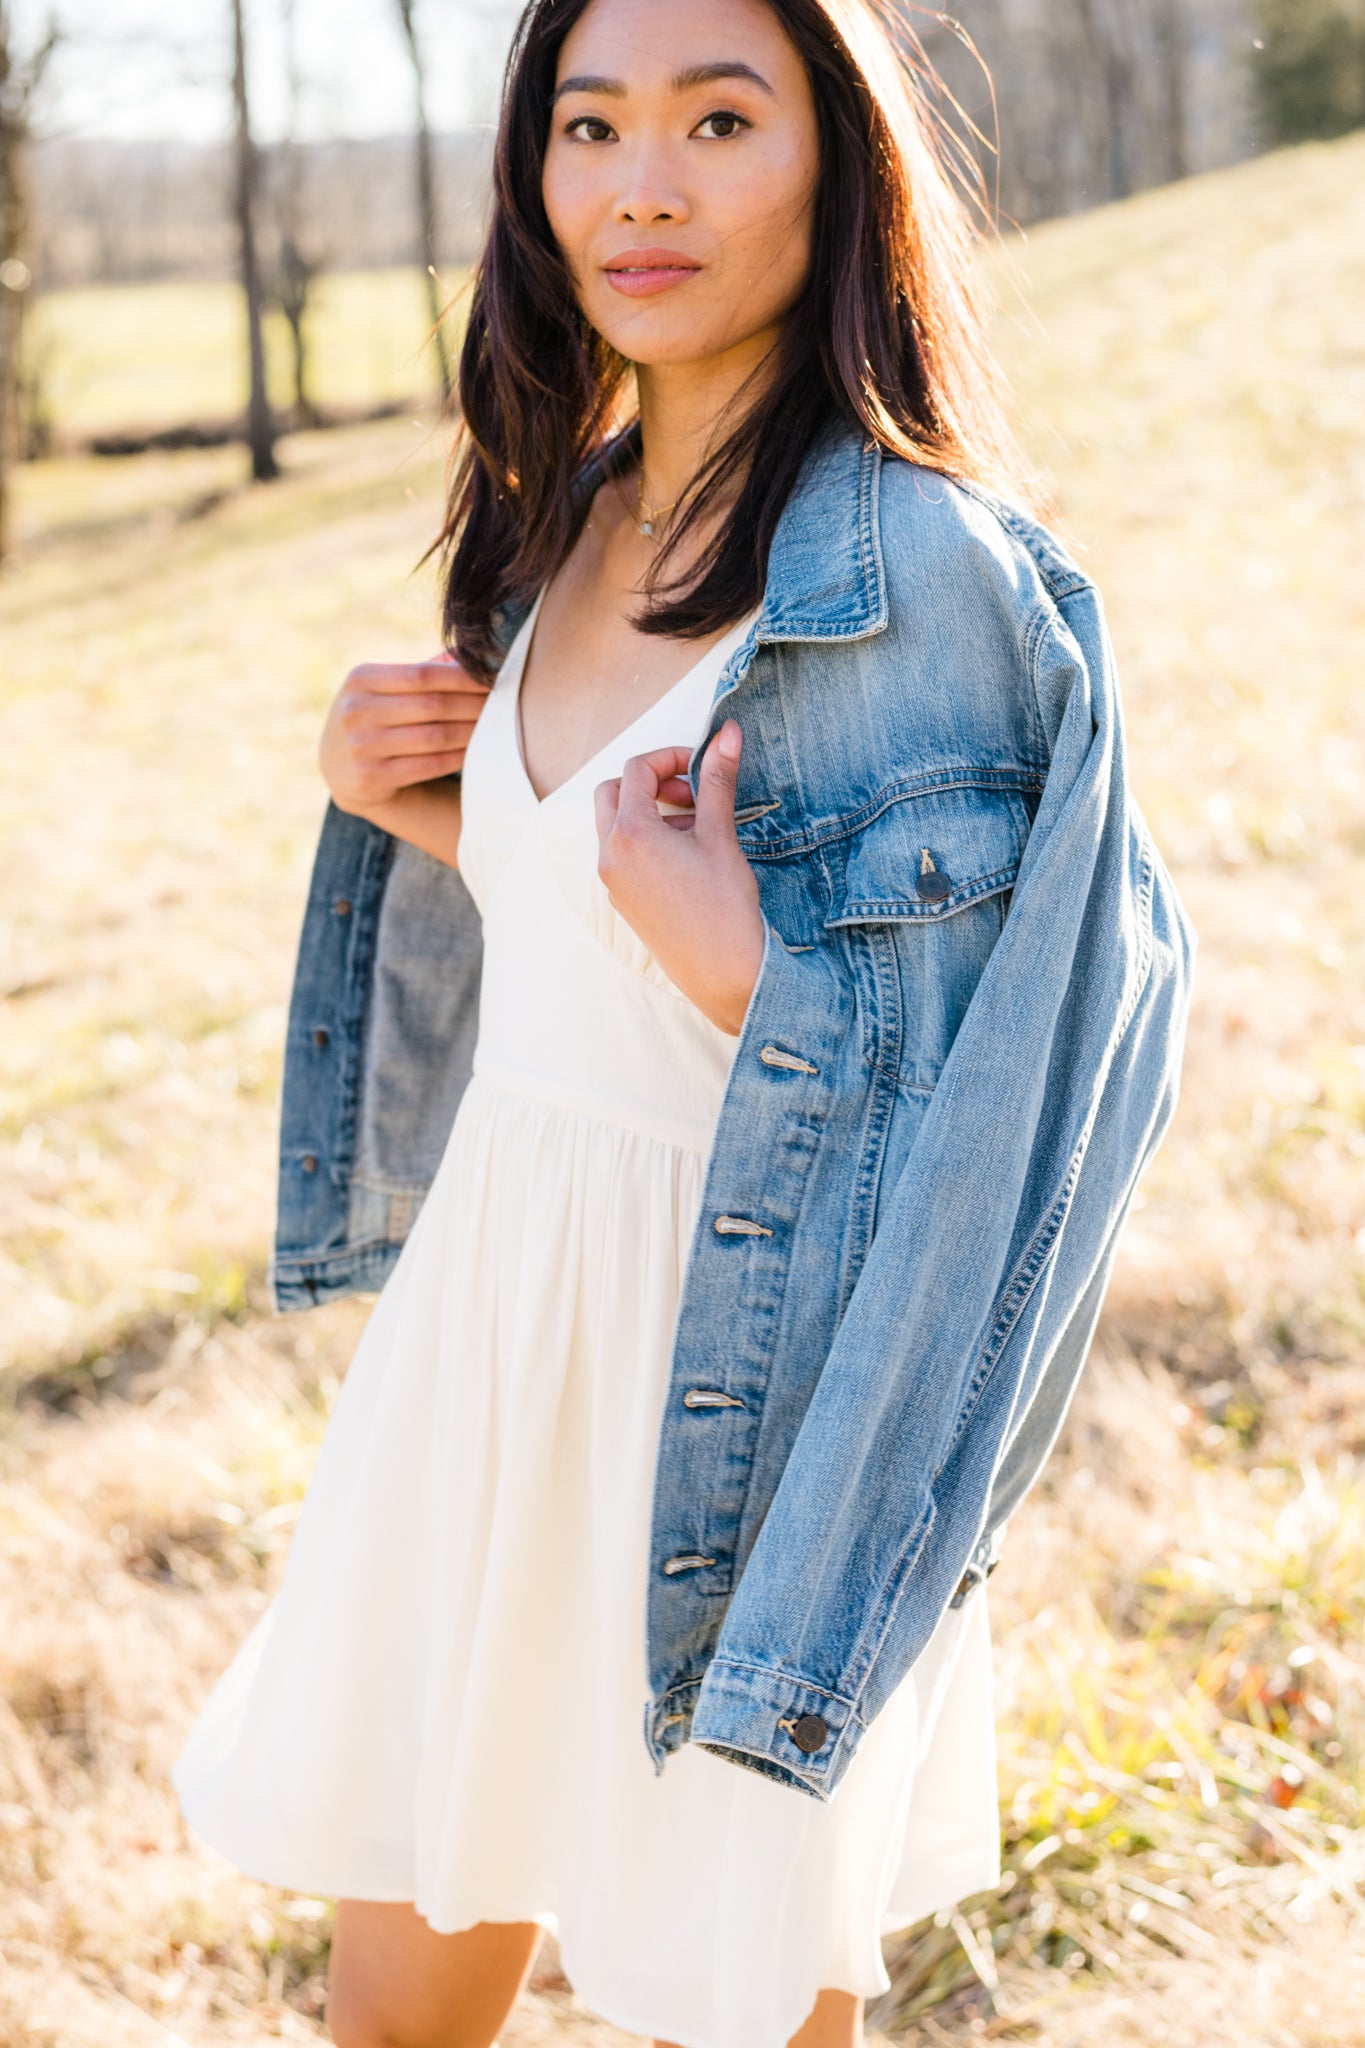 Woman in a white dress and denim jacket standing outdoors.